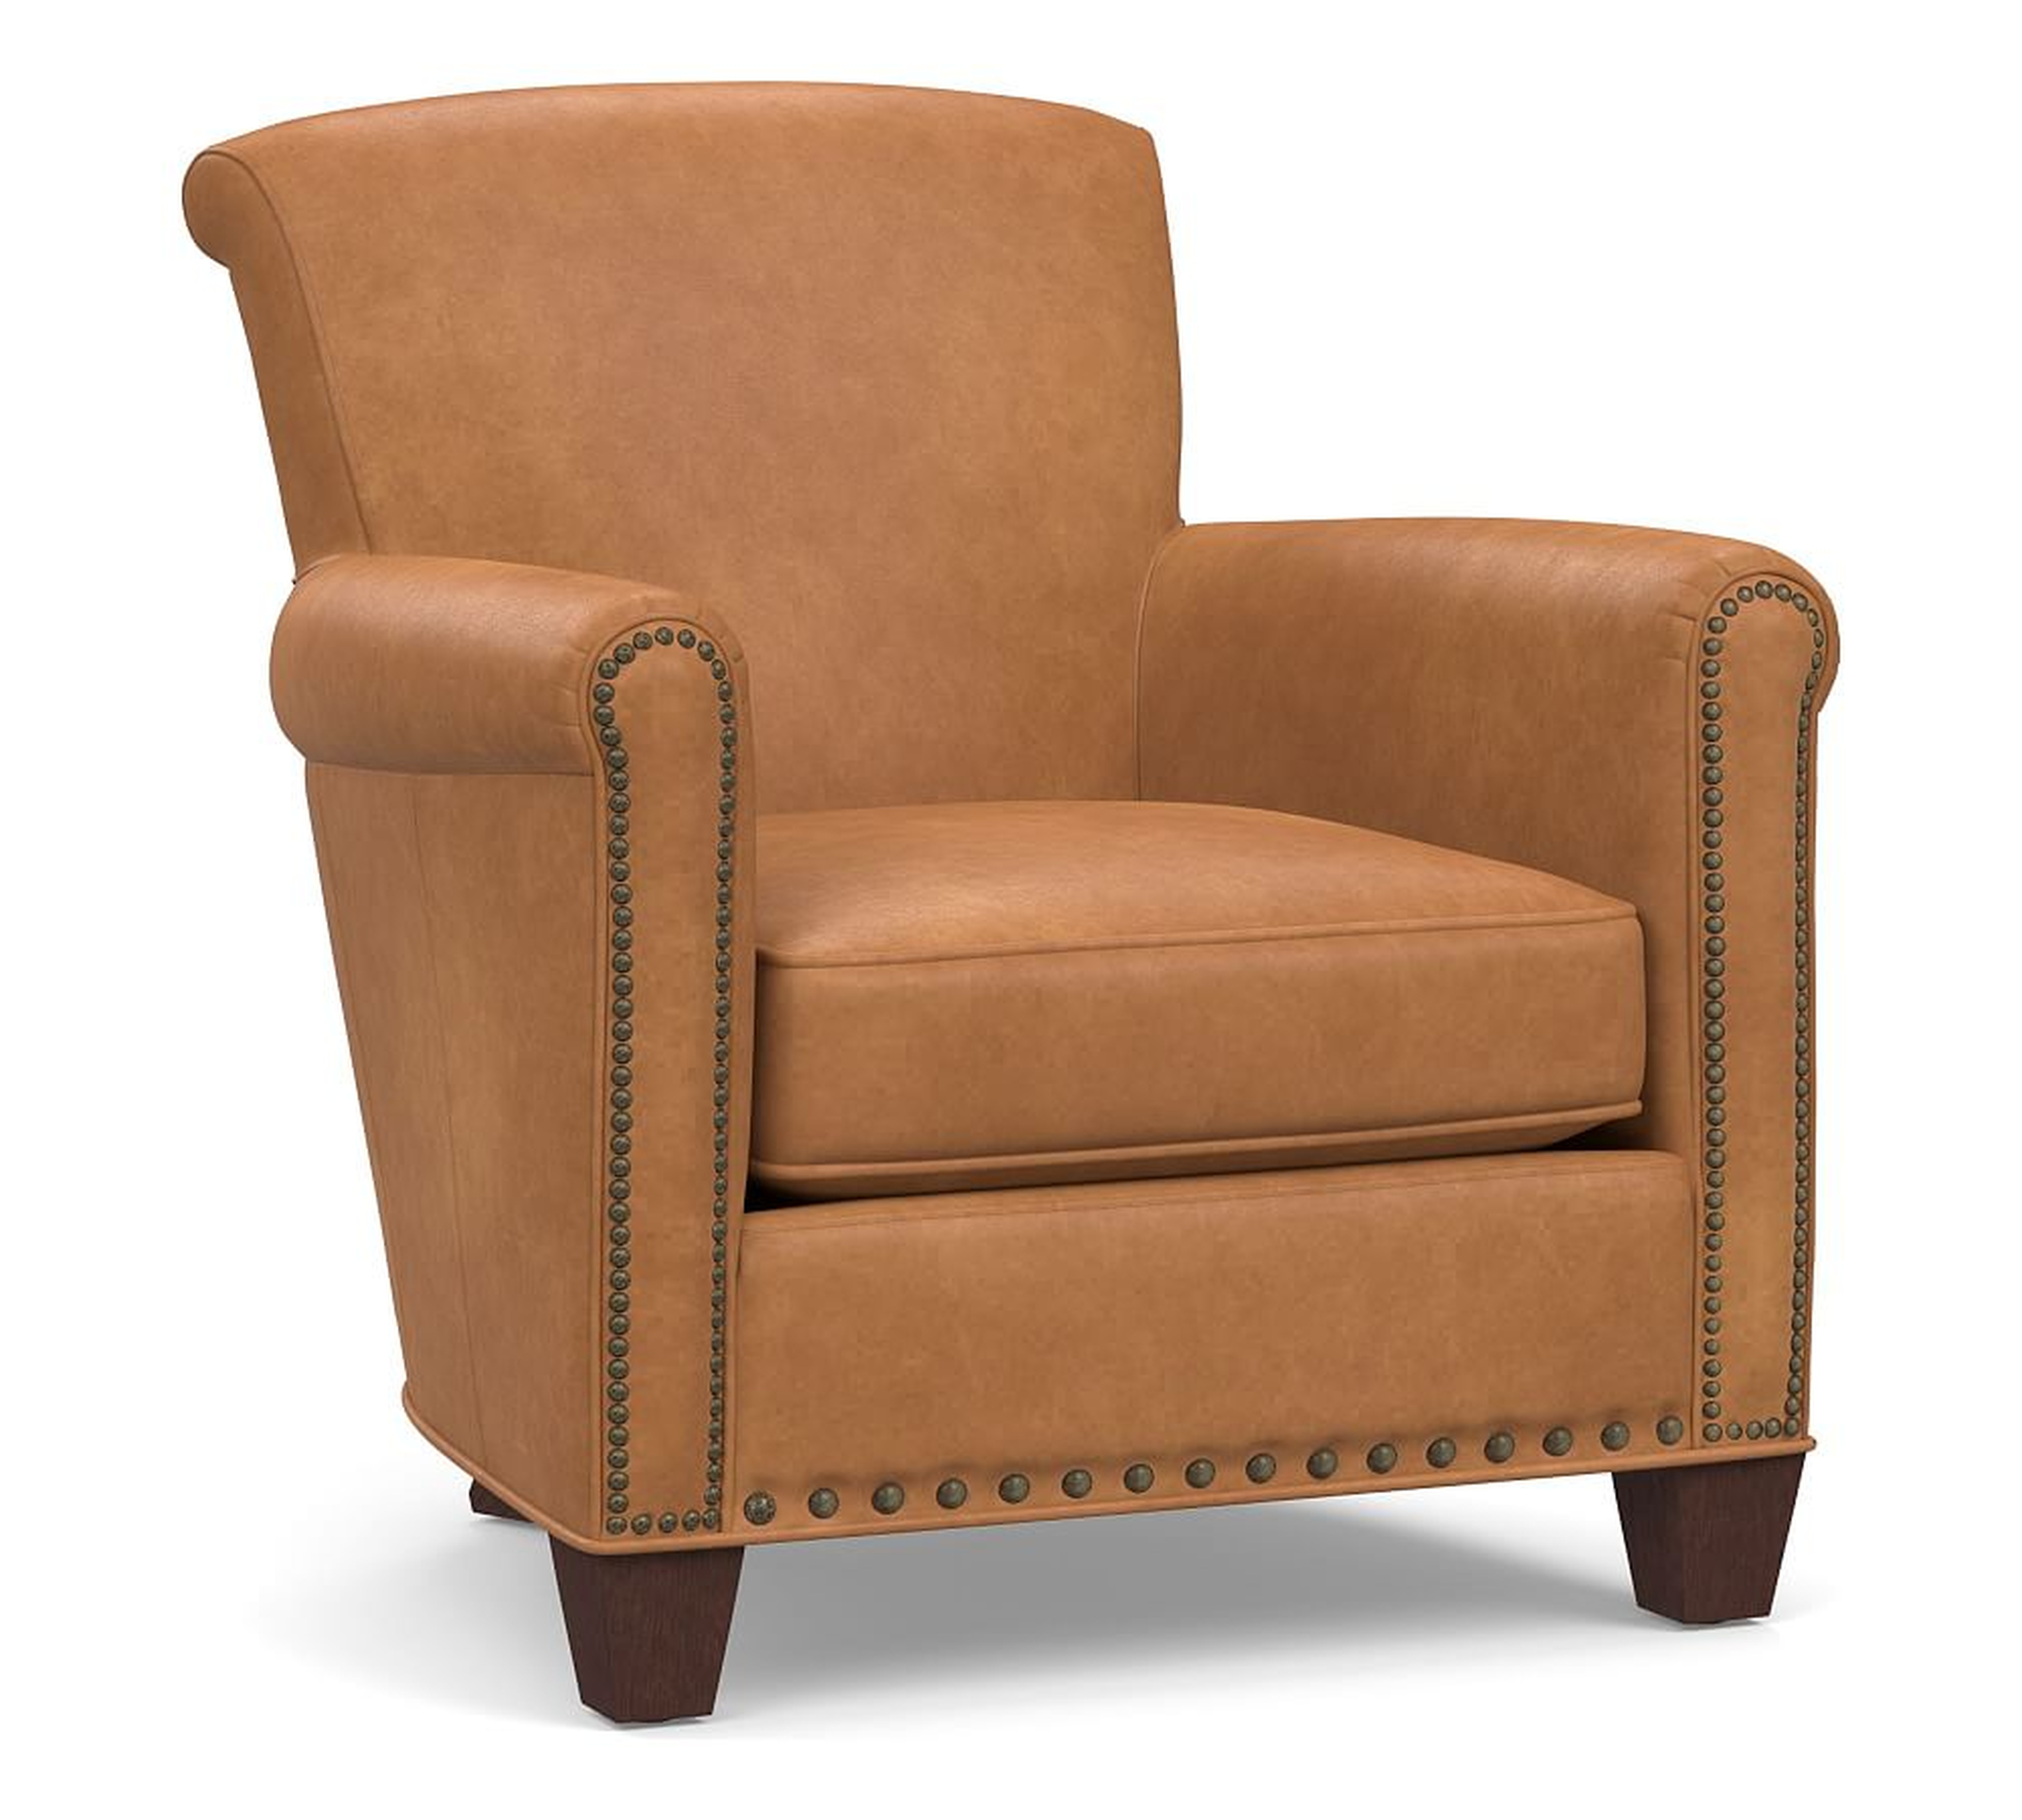 Irving Roll Arm Leather Armchair, Bronze Nailheads, Polyester Wrapped Cushions Churchfield Camel - Pottery Barn